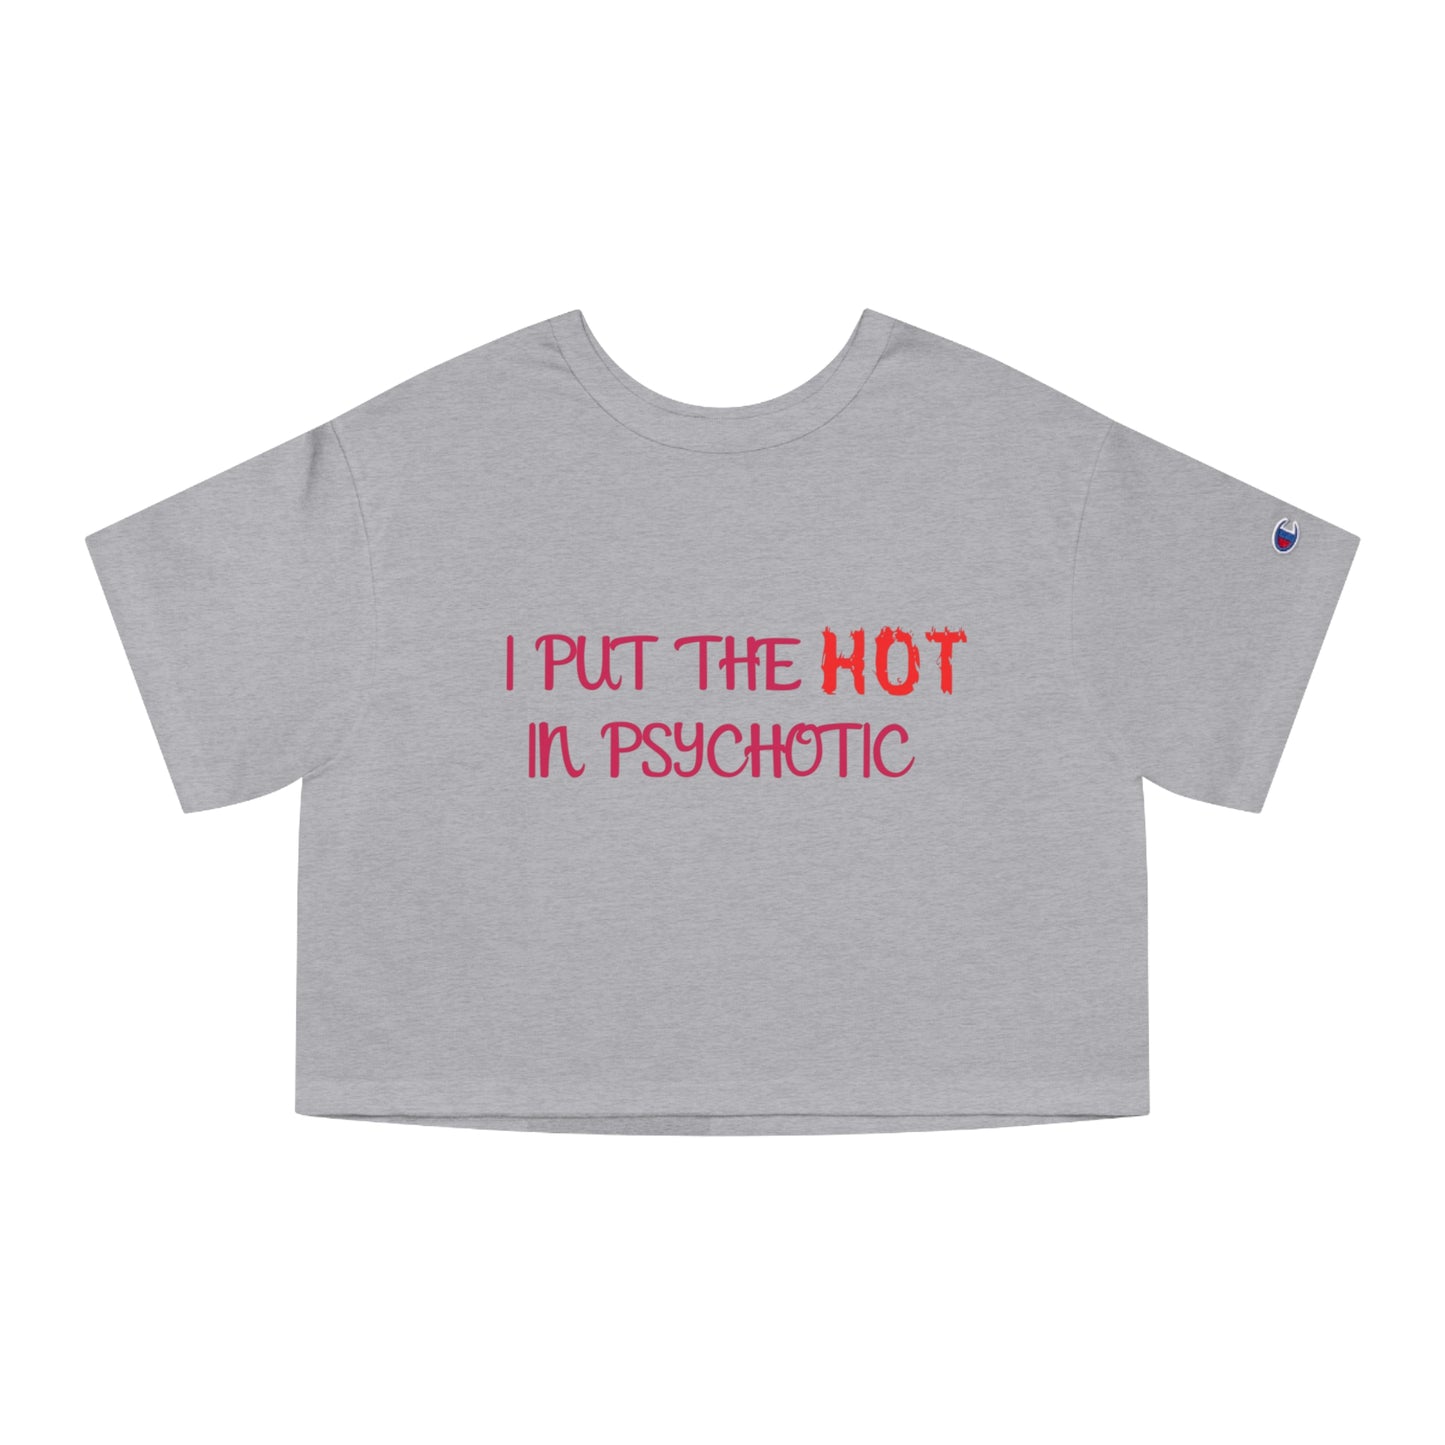 "I put the HOT in Psychotic" - Champion Crop Top